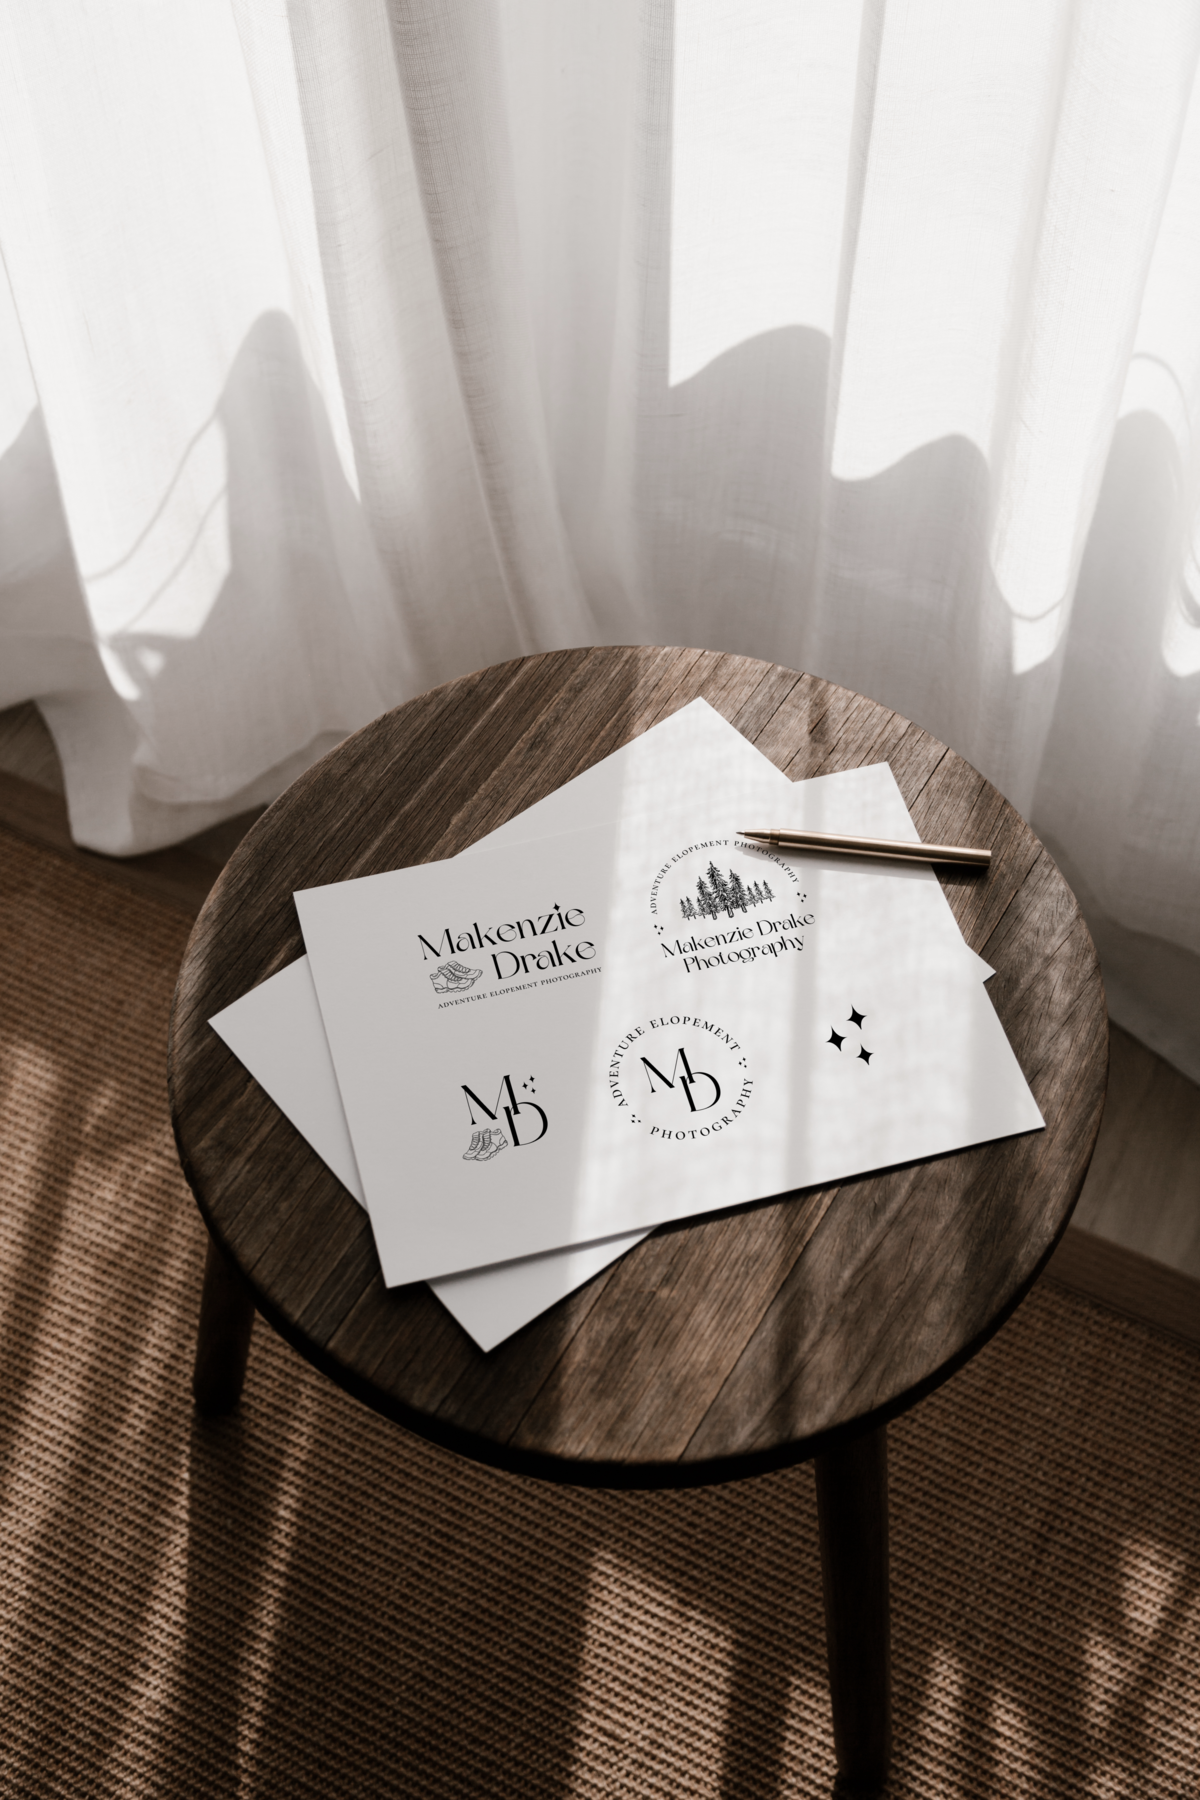 Papers with printed elopement photographer logos on paper lying on a table in the sunlight